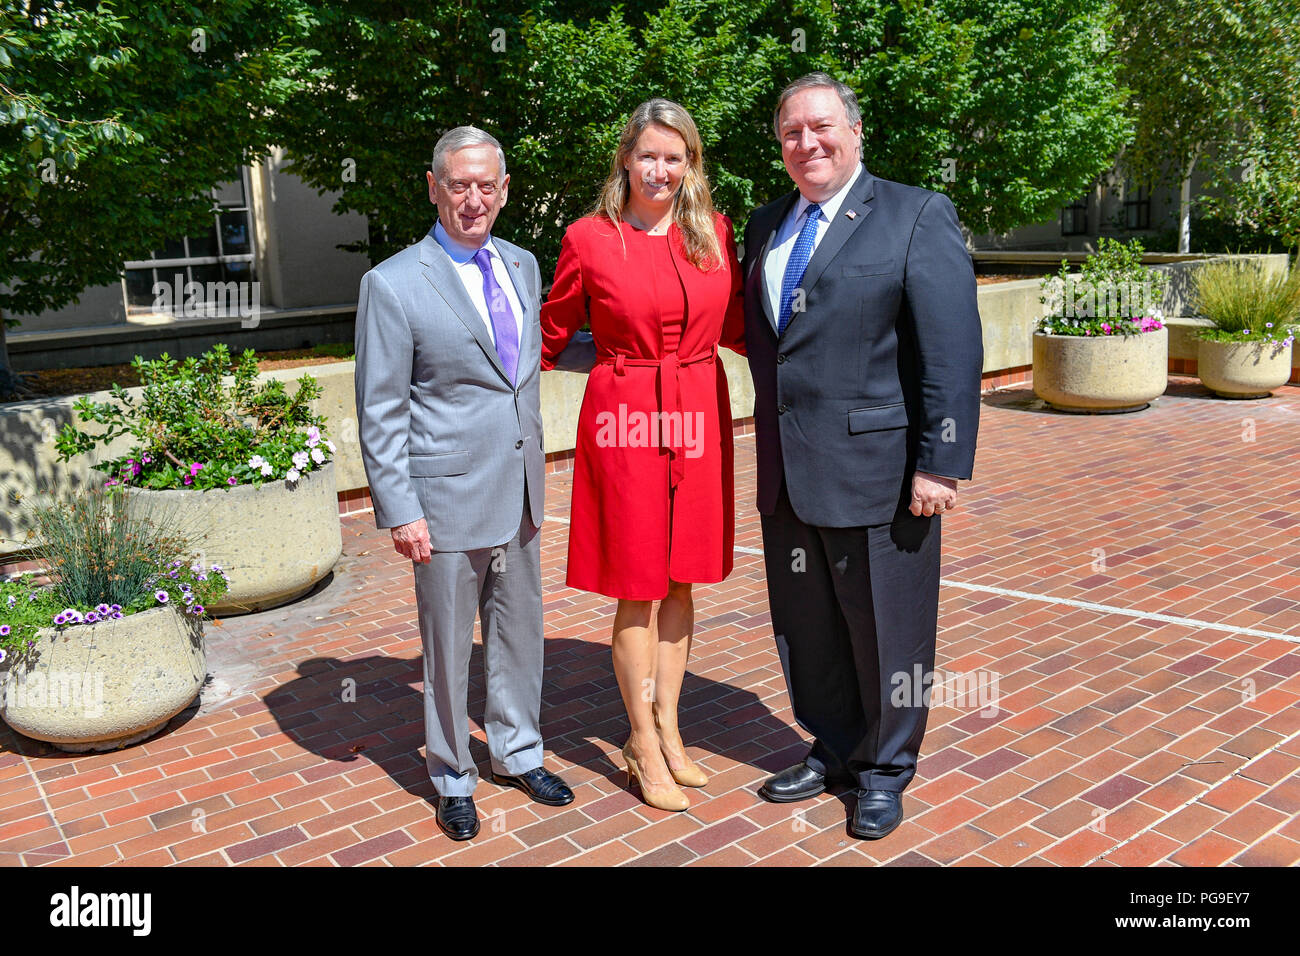 U.S. Secretary of State Michael R. Pompeo and U.S. Secretary of Defense James Mattis thank AUSMIN event organizers at the Hoover Institution at Stanford University in Palo Alto, California on July 24, 2018. Stock Photo